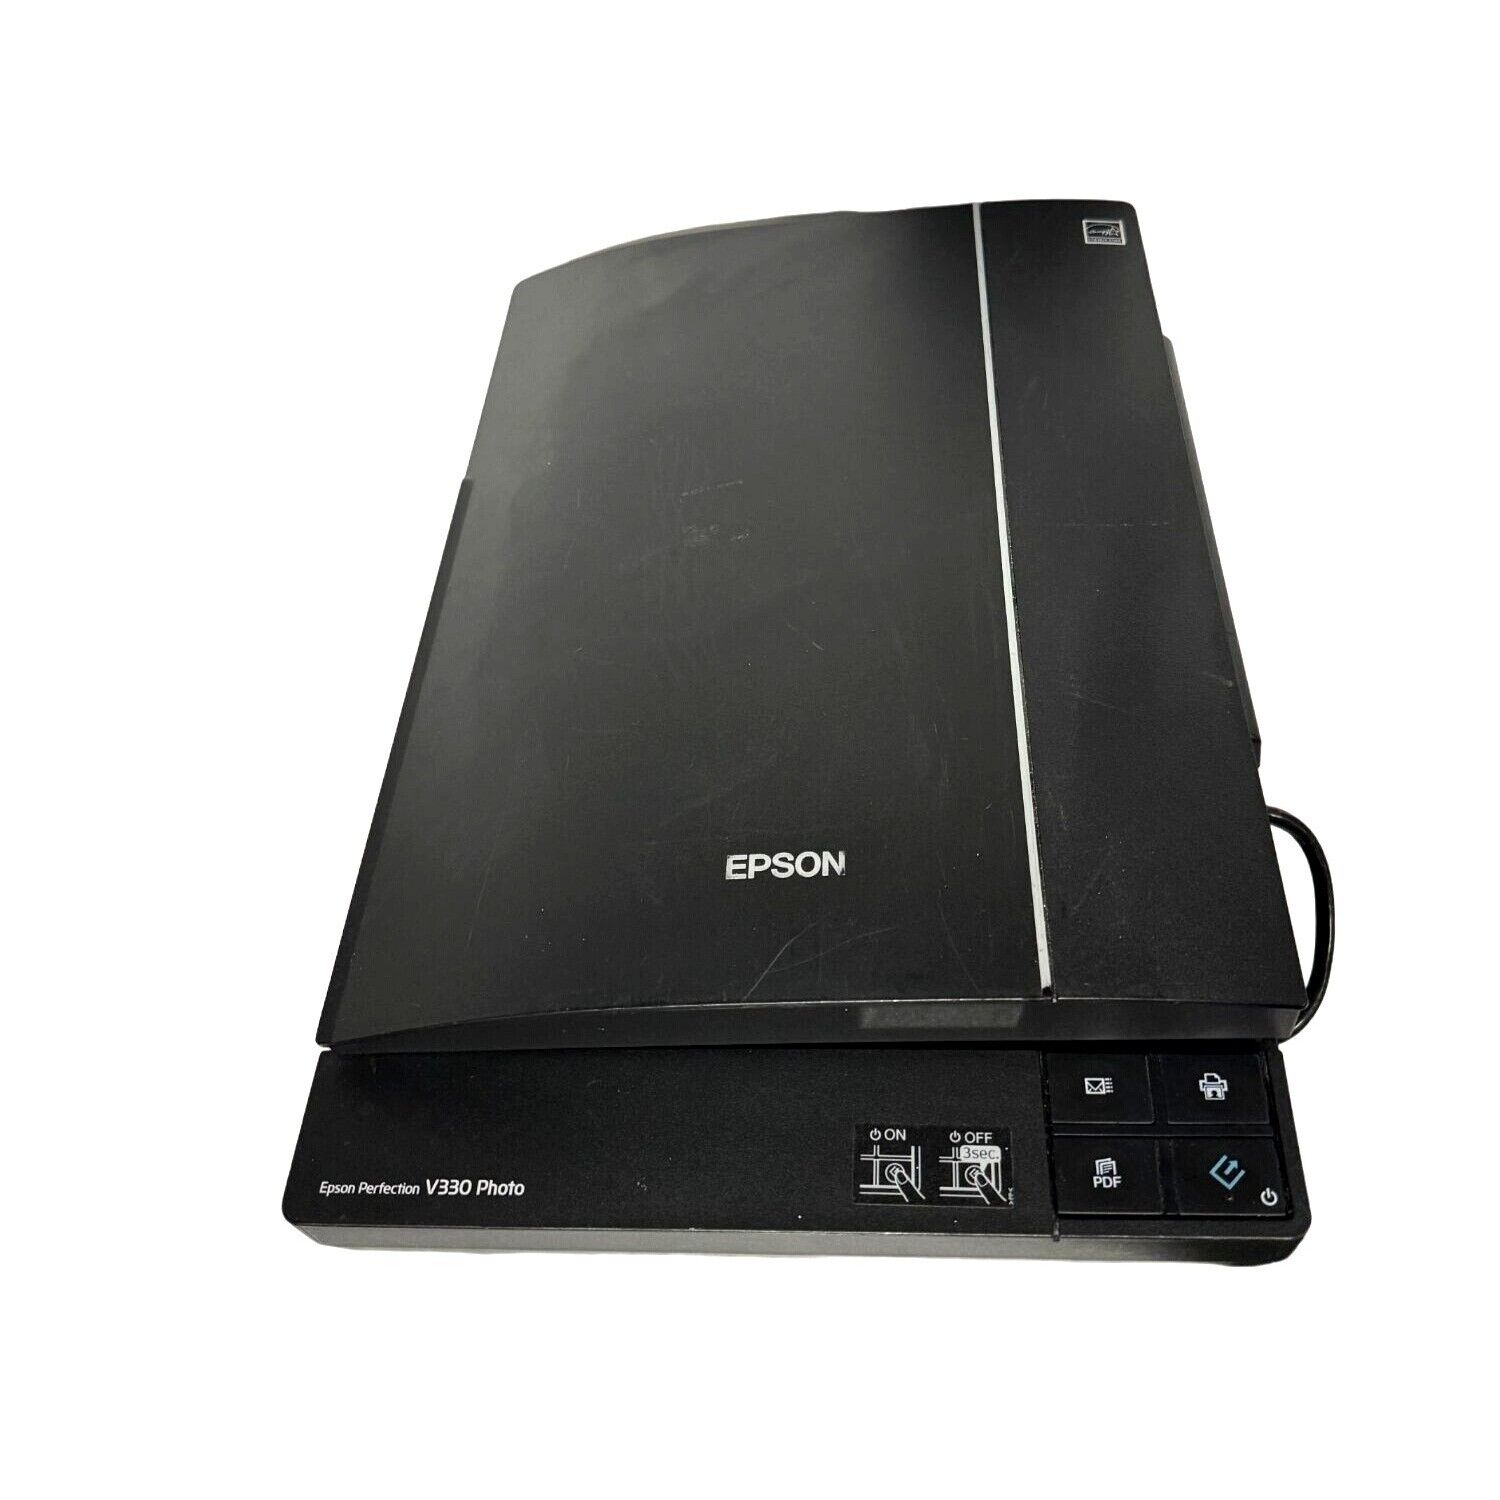 Epson Perfection V330 Photo Scanner Functional One Broken Hinge: No Accessories